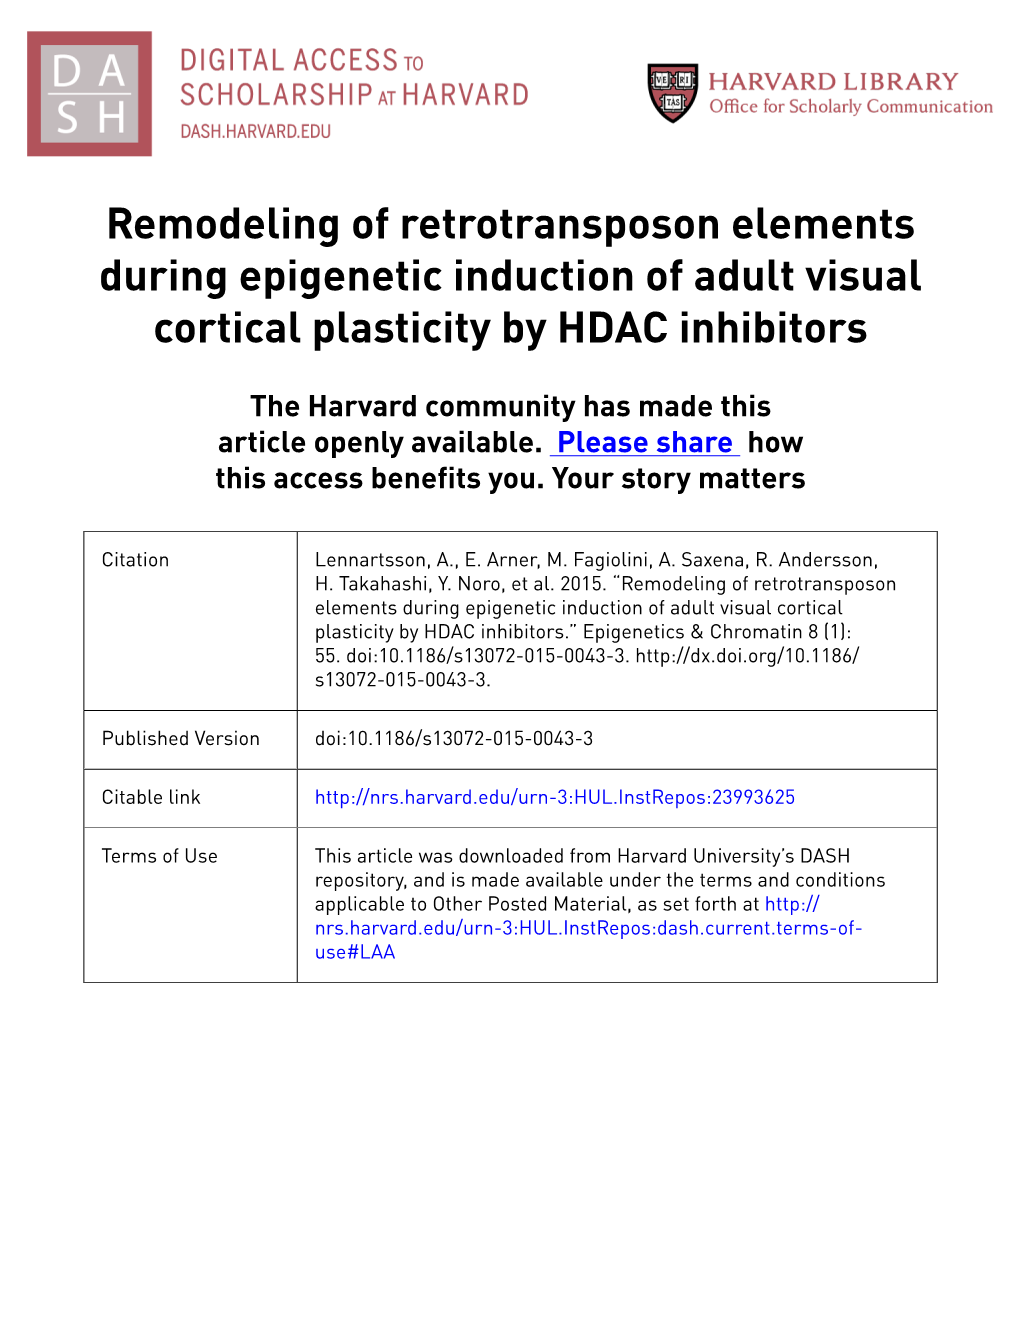 Remodeling of Retrotransposon Elements During Epigenetic Induction of Adult Visual Cortical Plasticity by HDAC Inhibitors